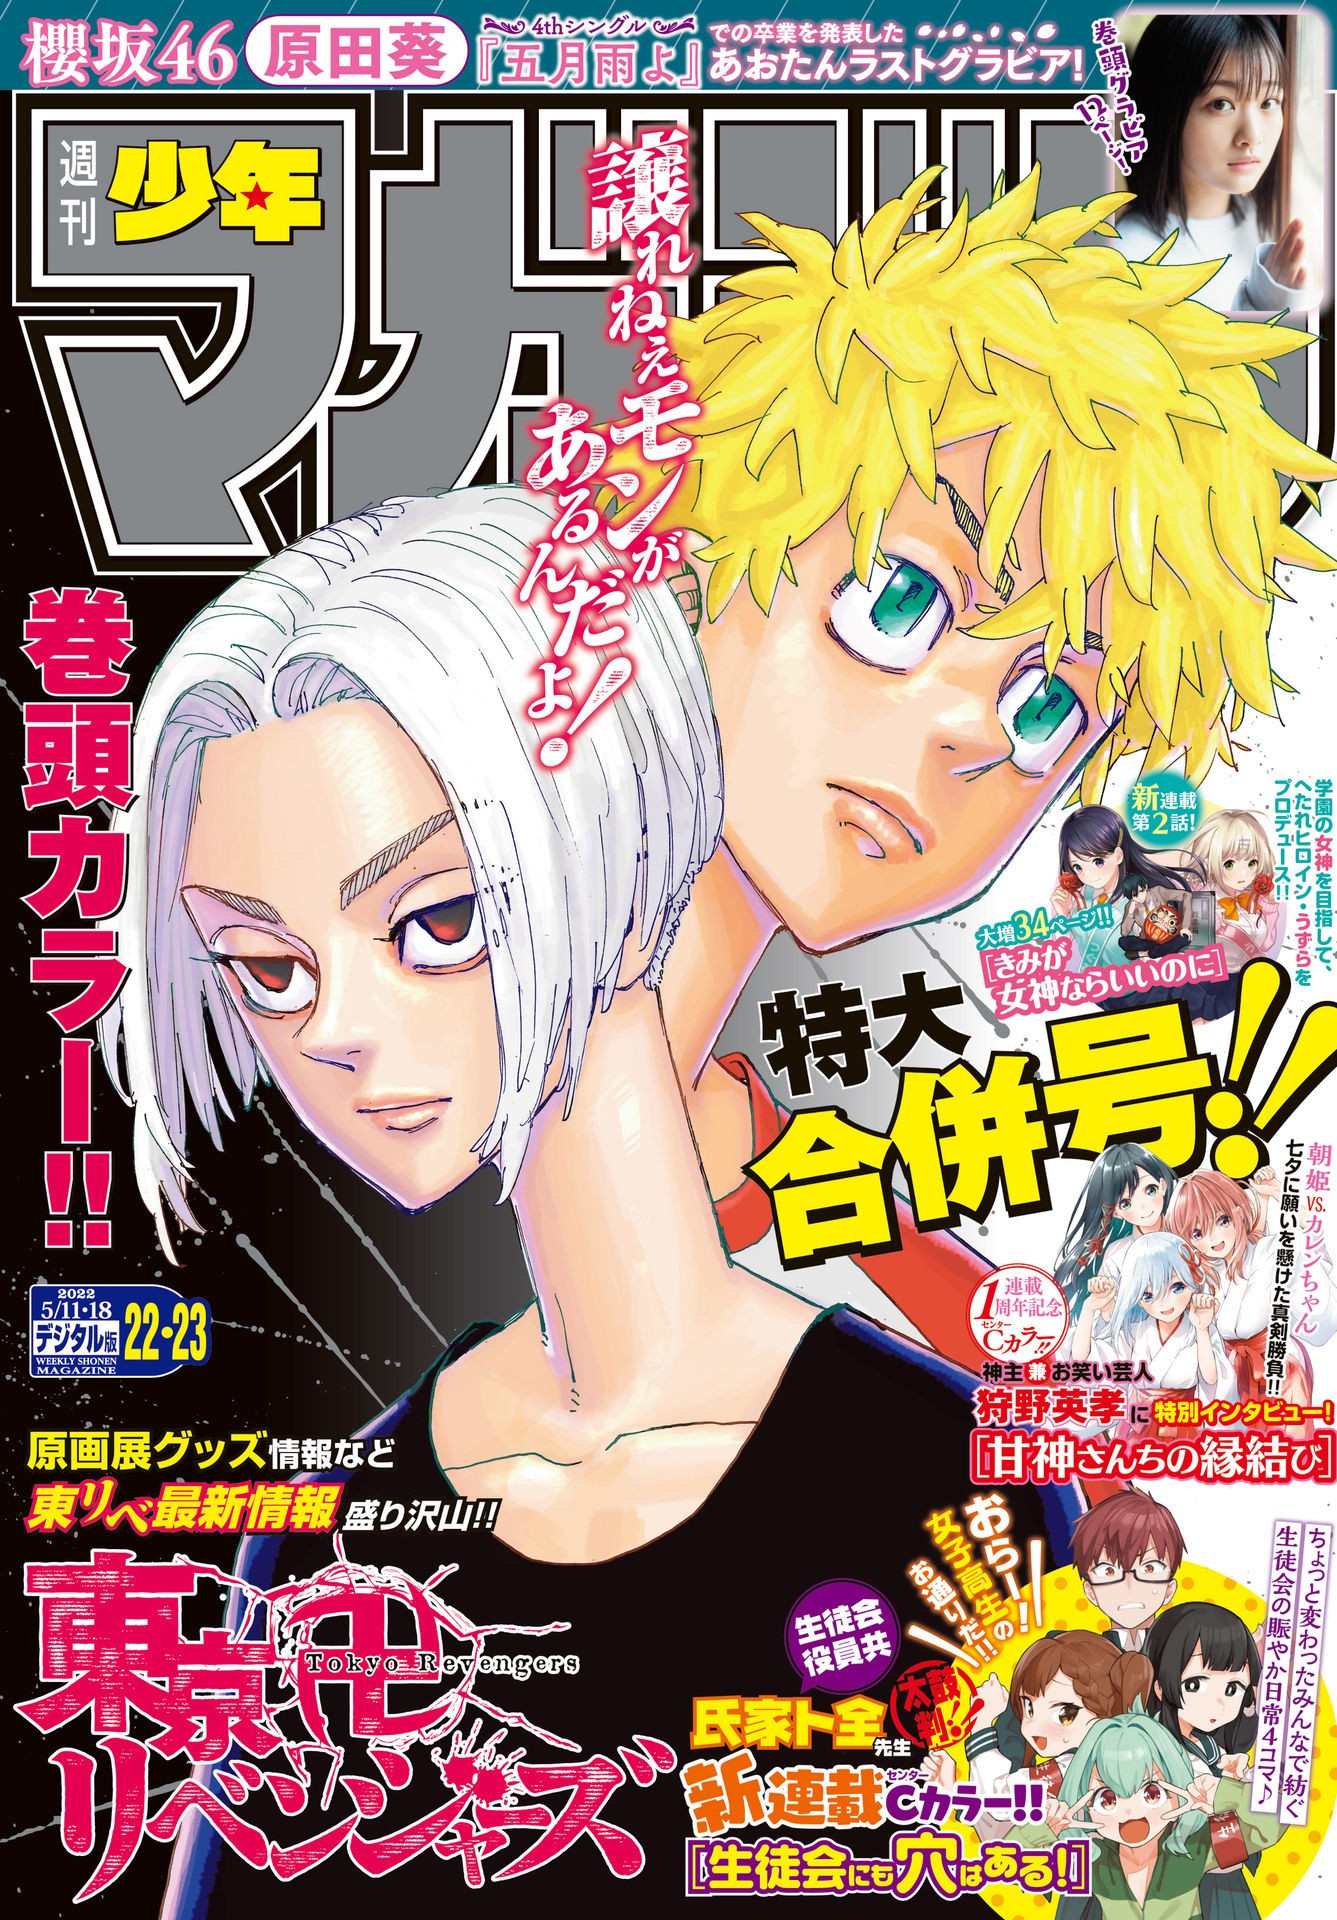 Weekly Shōnen Magazine - 週刊少年マガジン - Chapter 2022-22-23 - Page 1